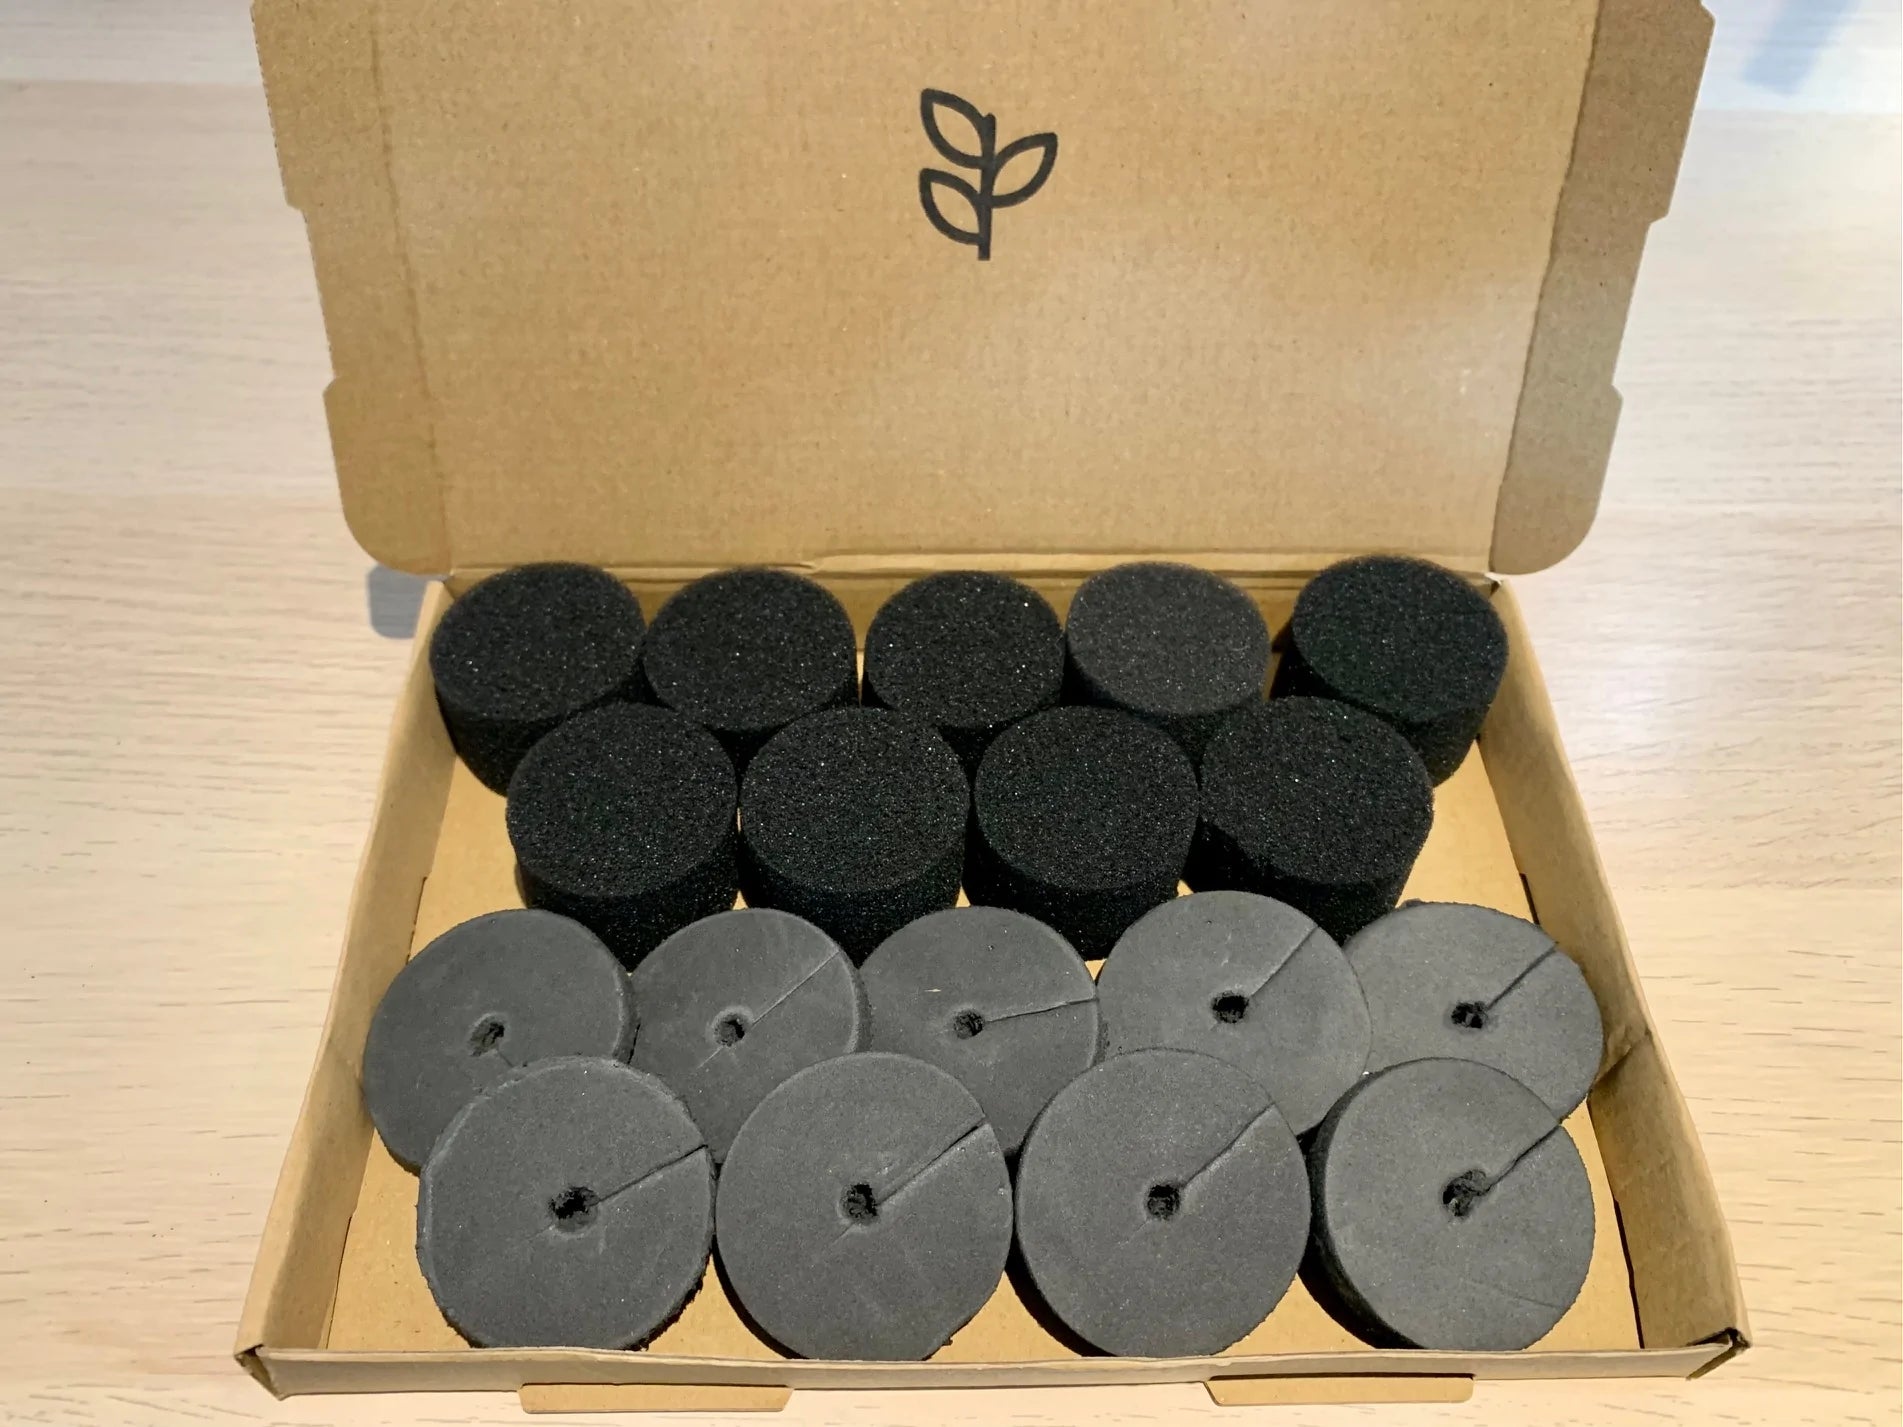 Mixed Pack of 9 Open Cell Cloning Collars and 9 Closed Cell Pucks (18 total) Free Standard Postage Vertical Horizon Hydroponics